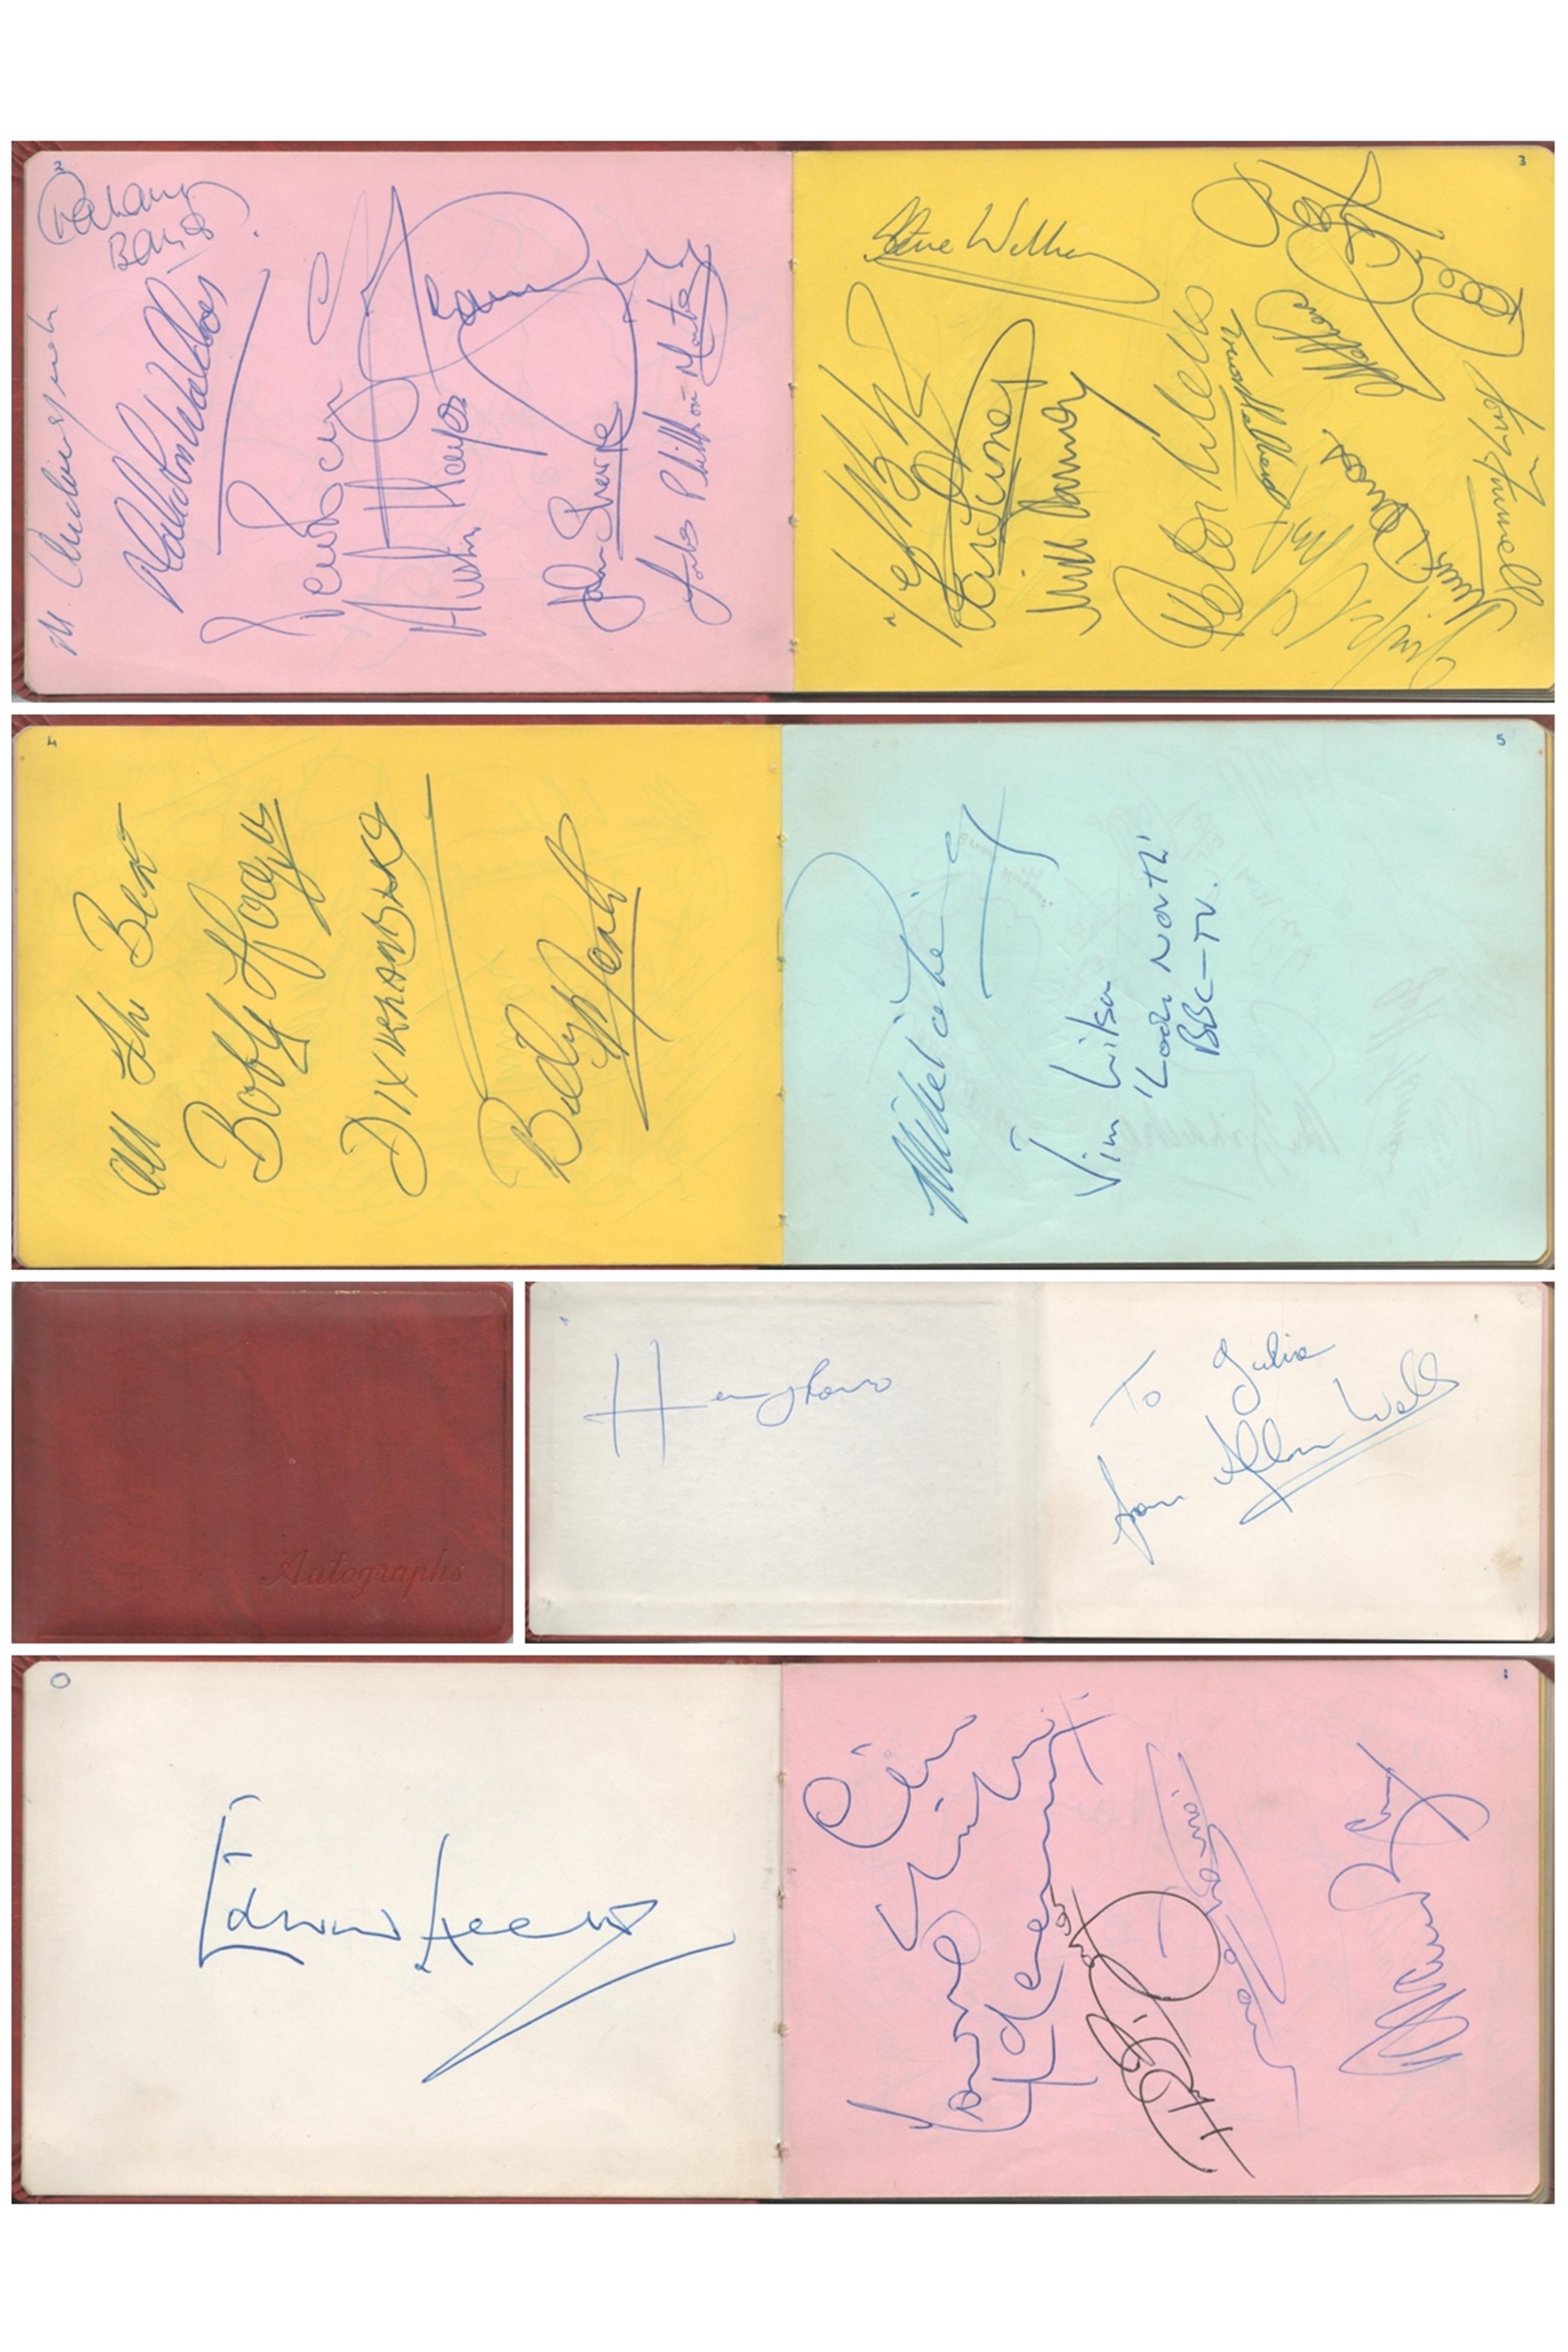 Entertainment and Sport Autograph Book collection includes some fantastic signatures such as